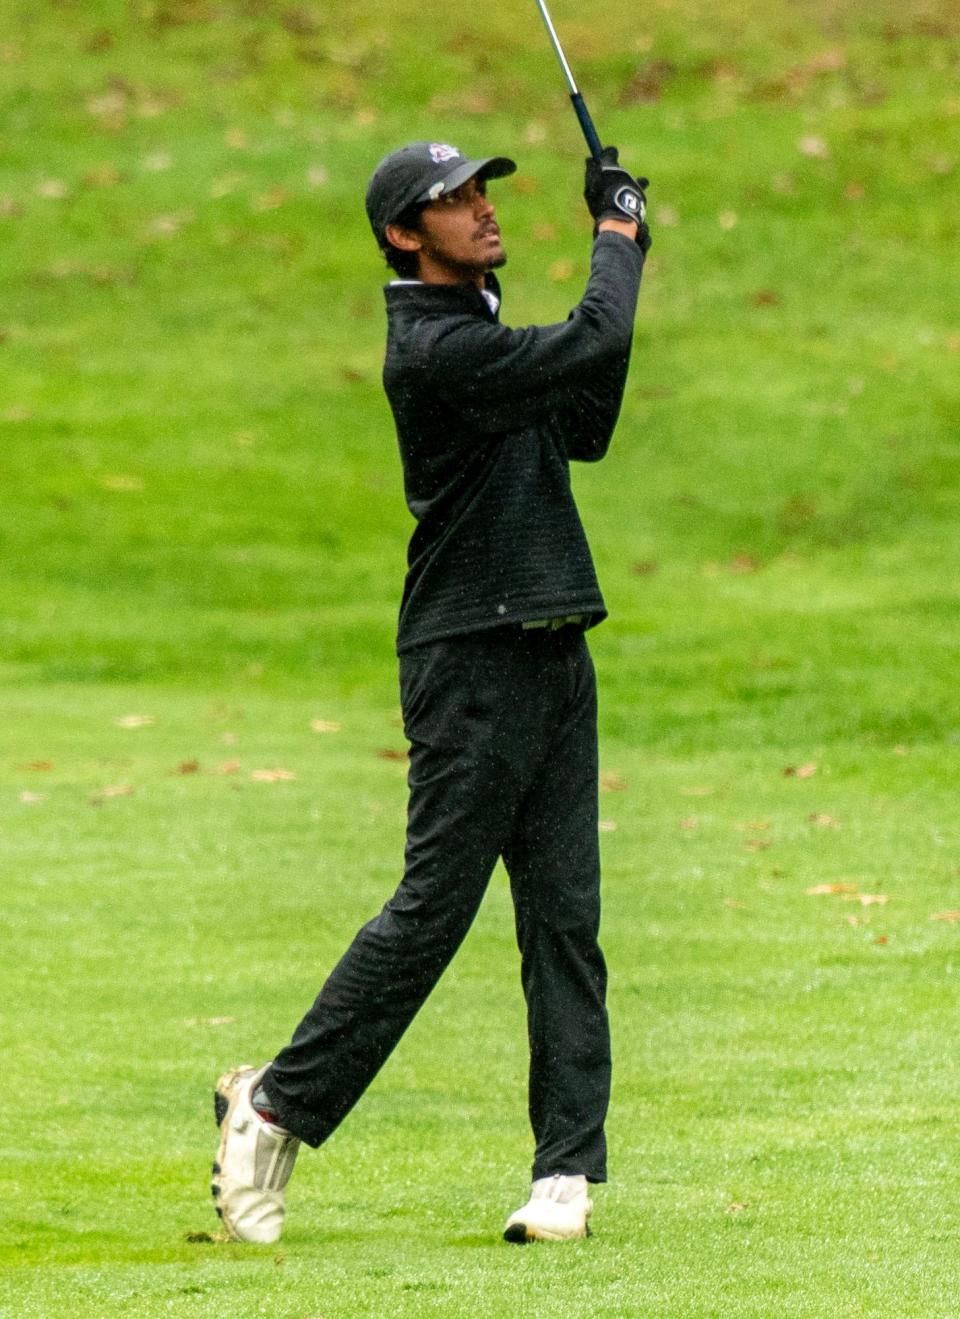 Ayer-Shirley's Sohil Patel hits on the ninth fairway during the Division 3 state golf championship at Sterling National.